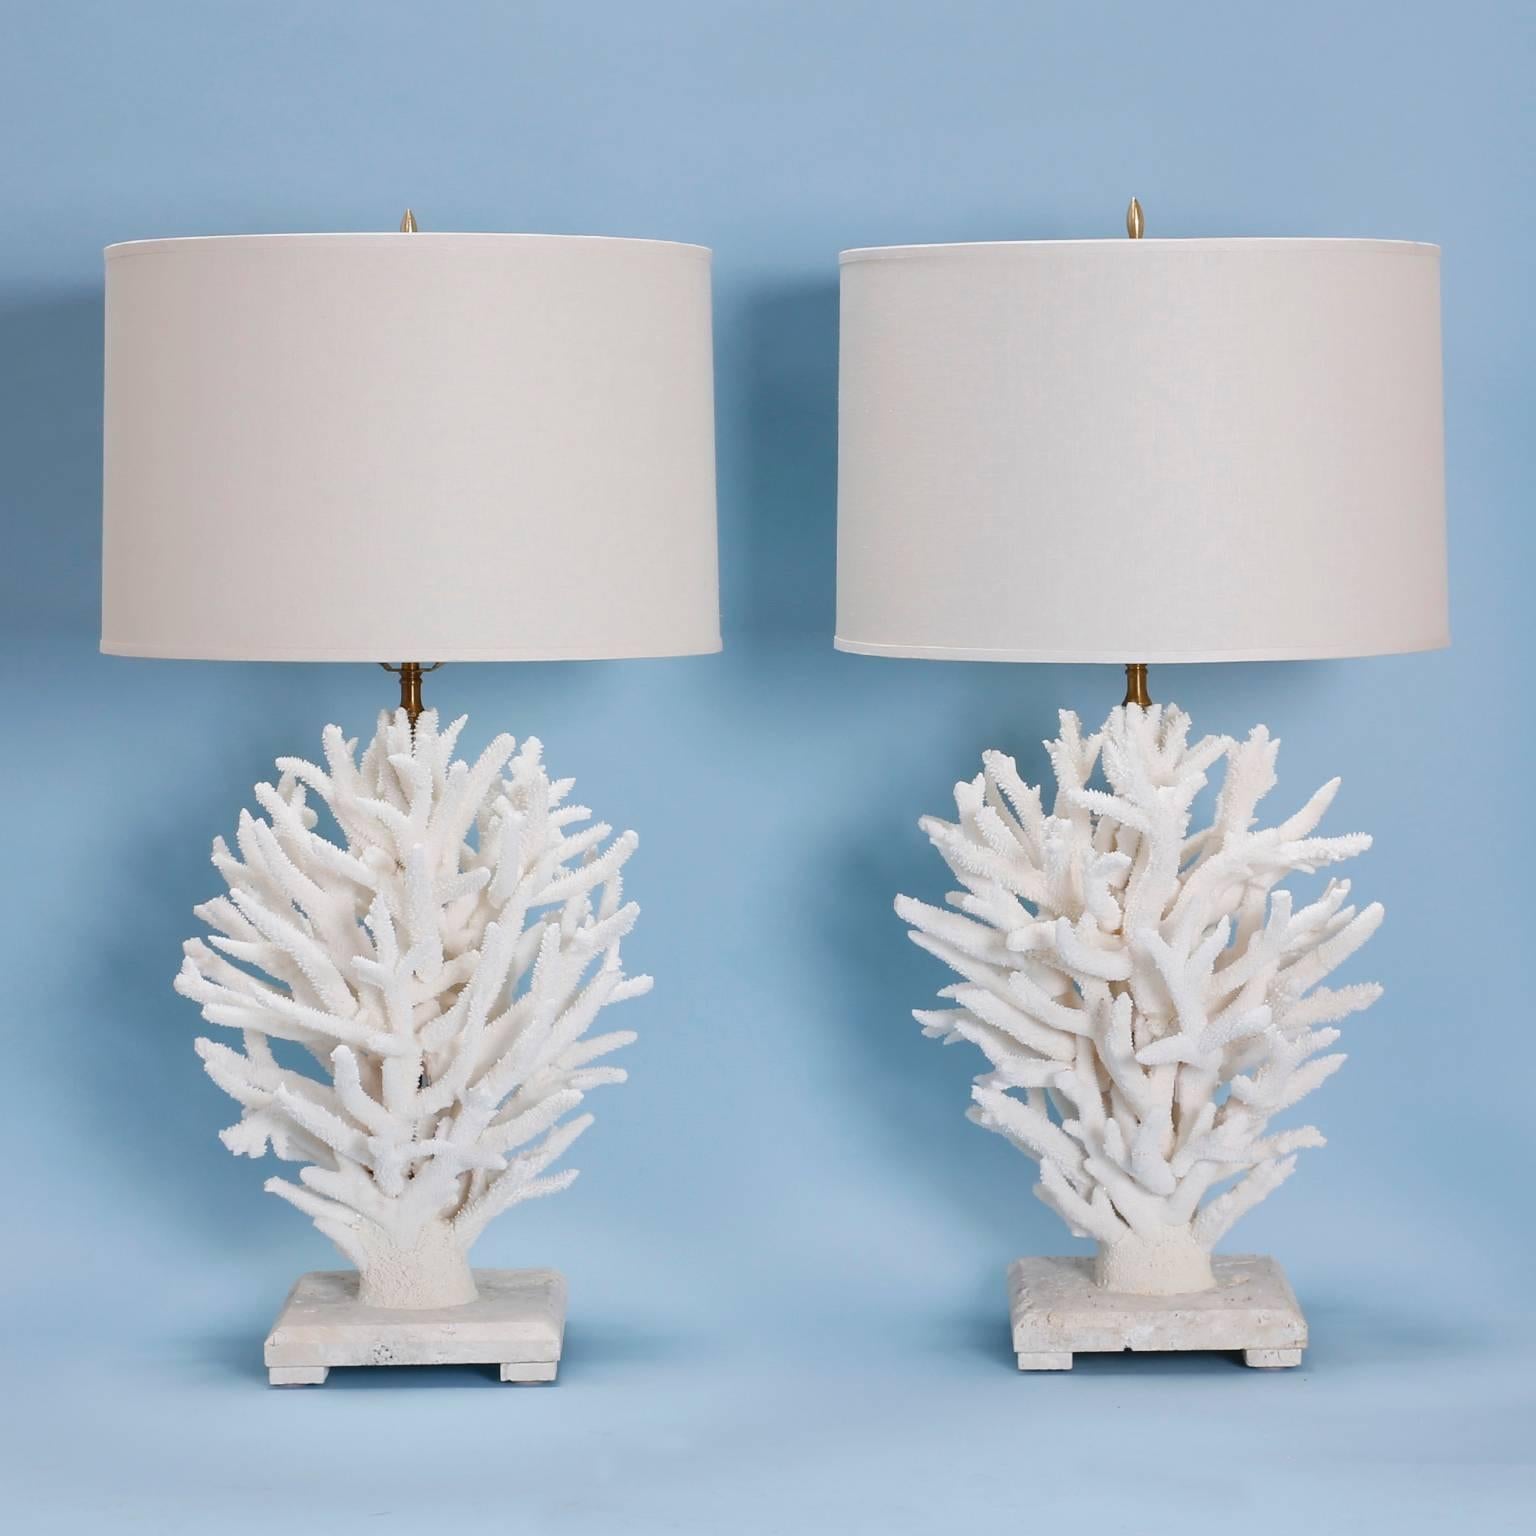 Pair of sculptural staghorn coral table lamps custom-made by F. S. Henemader. Composed of authentic farm raised coral re-imagined by our artisans into stylish, functional works of art. (Bases are 8 x 8).

This piece cannot be shipped out of the US,